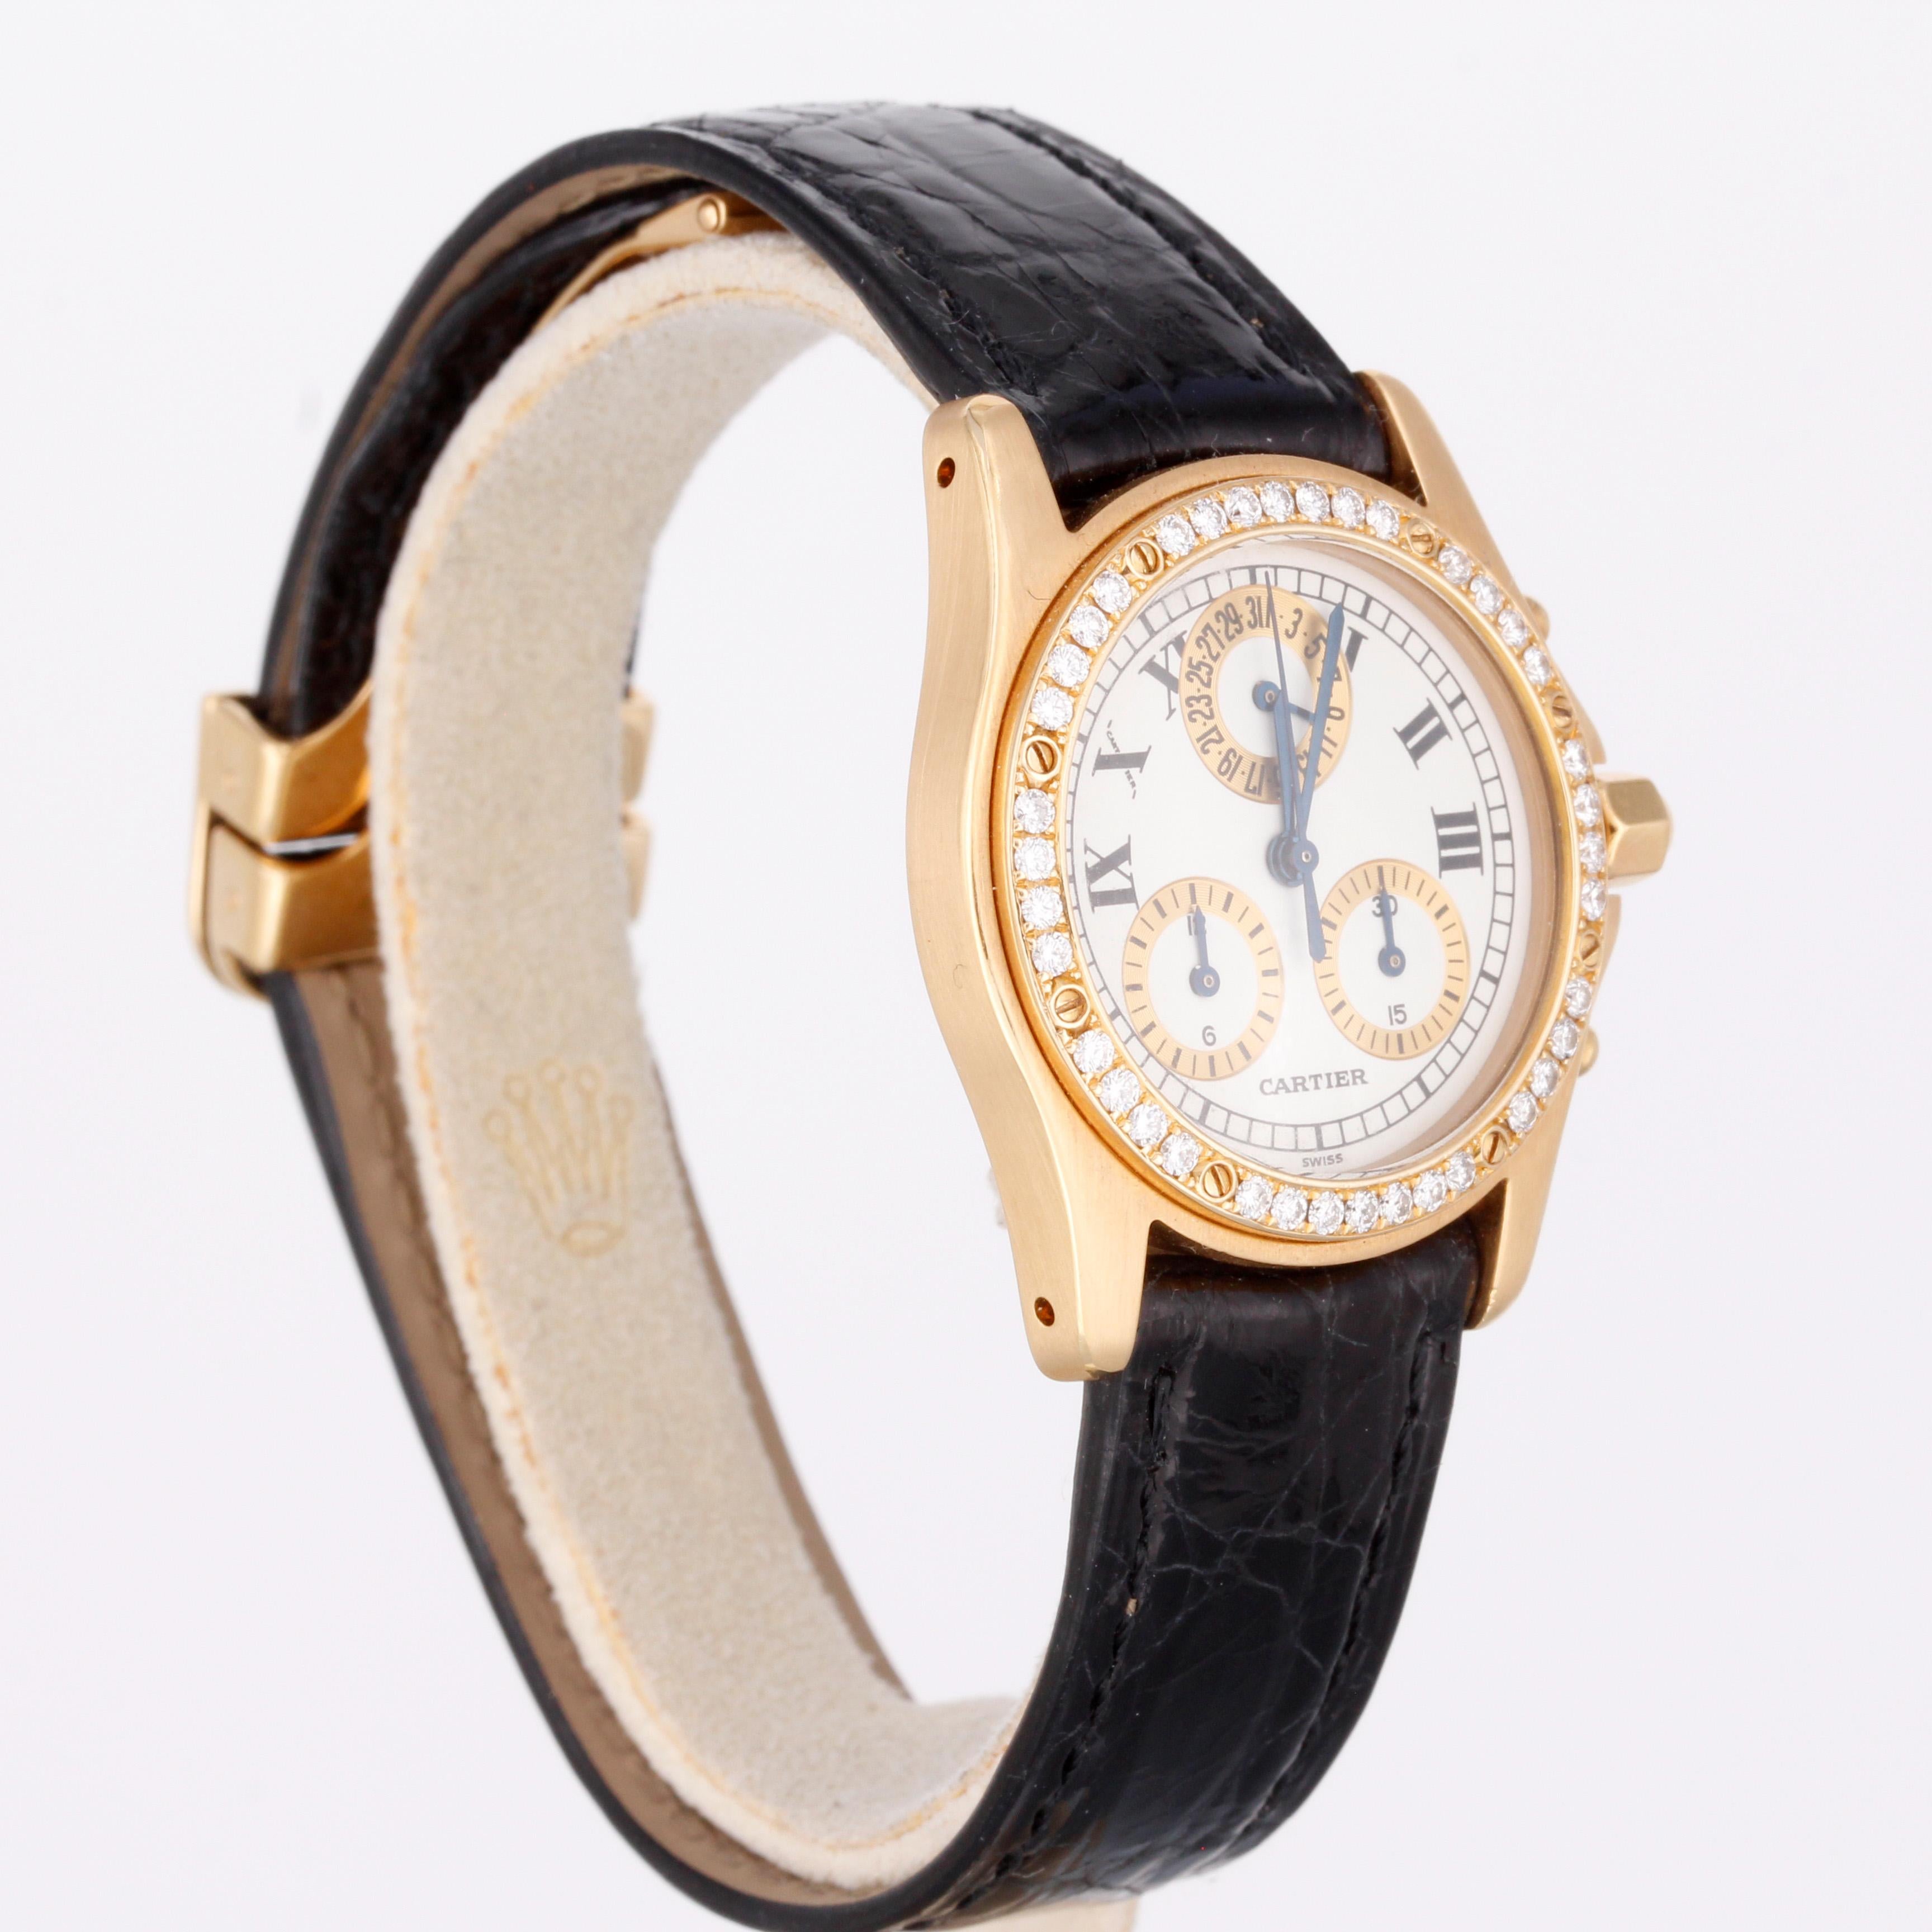 Contemporary Cartier Santos Ronde Chronograph Yellow Gold Ladies Watch Ref.: 1530 For Sale